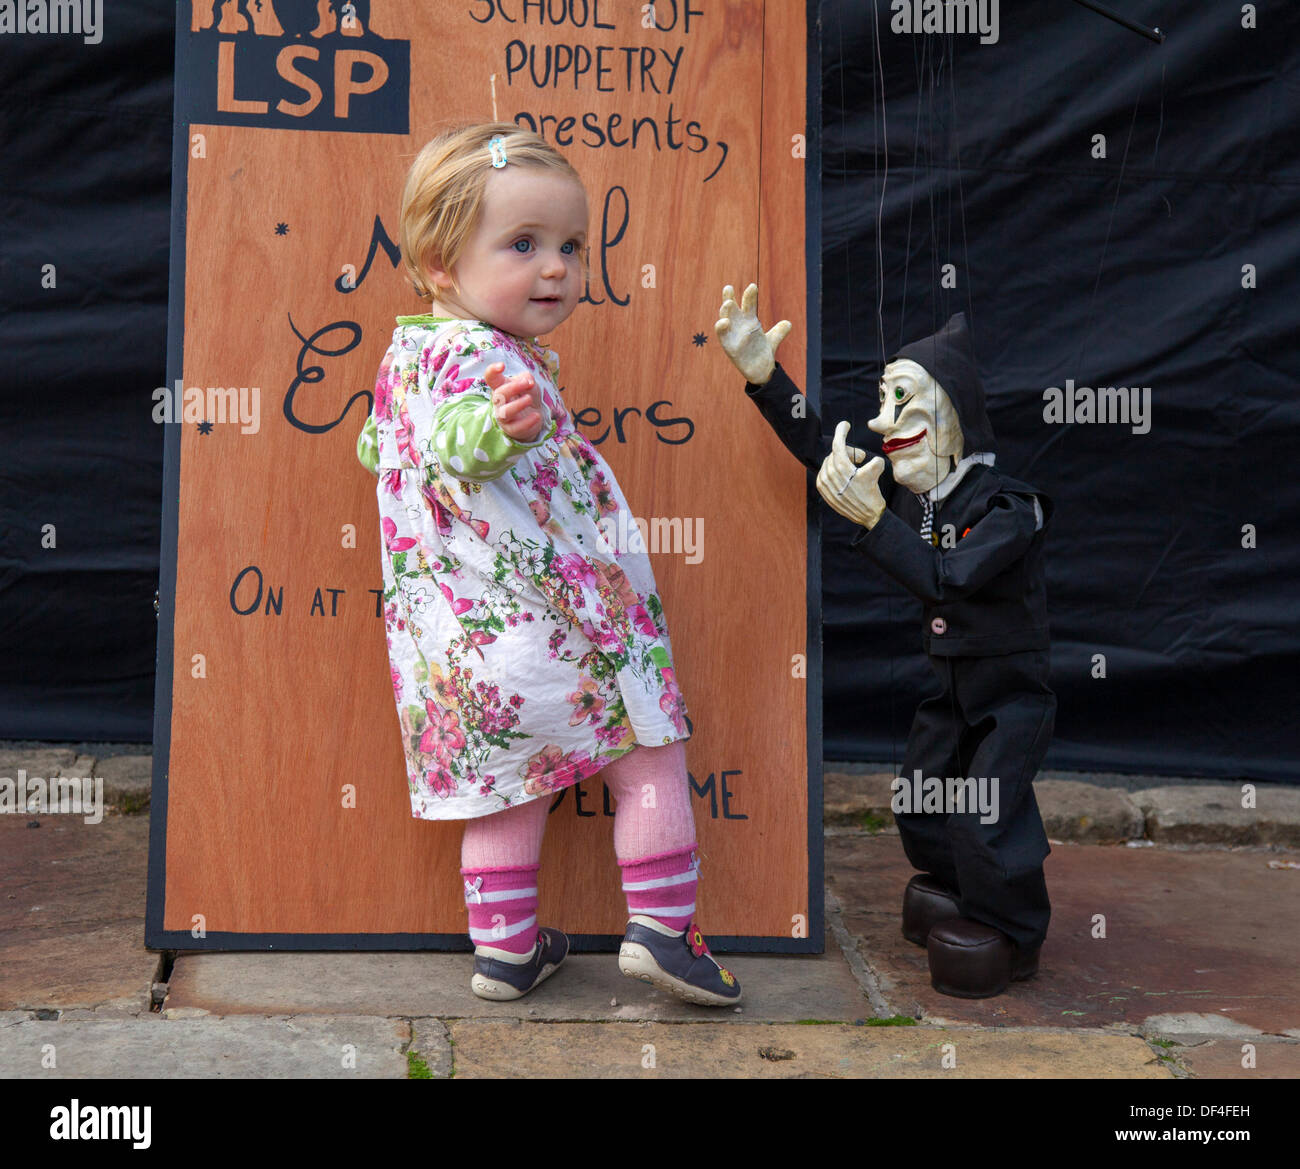 Skipton UK. 27th September, 2013. International Puppet Festival. Daisy Le Drew, 1 year old baby from Derby at Skipton's biennial international puppet festival, sideshow featuring puppet theatre control companies from all over Europe. Stock Photo